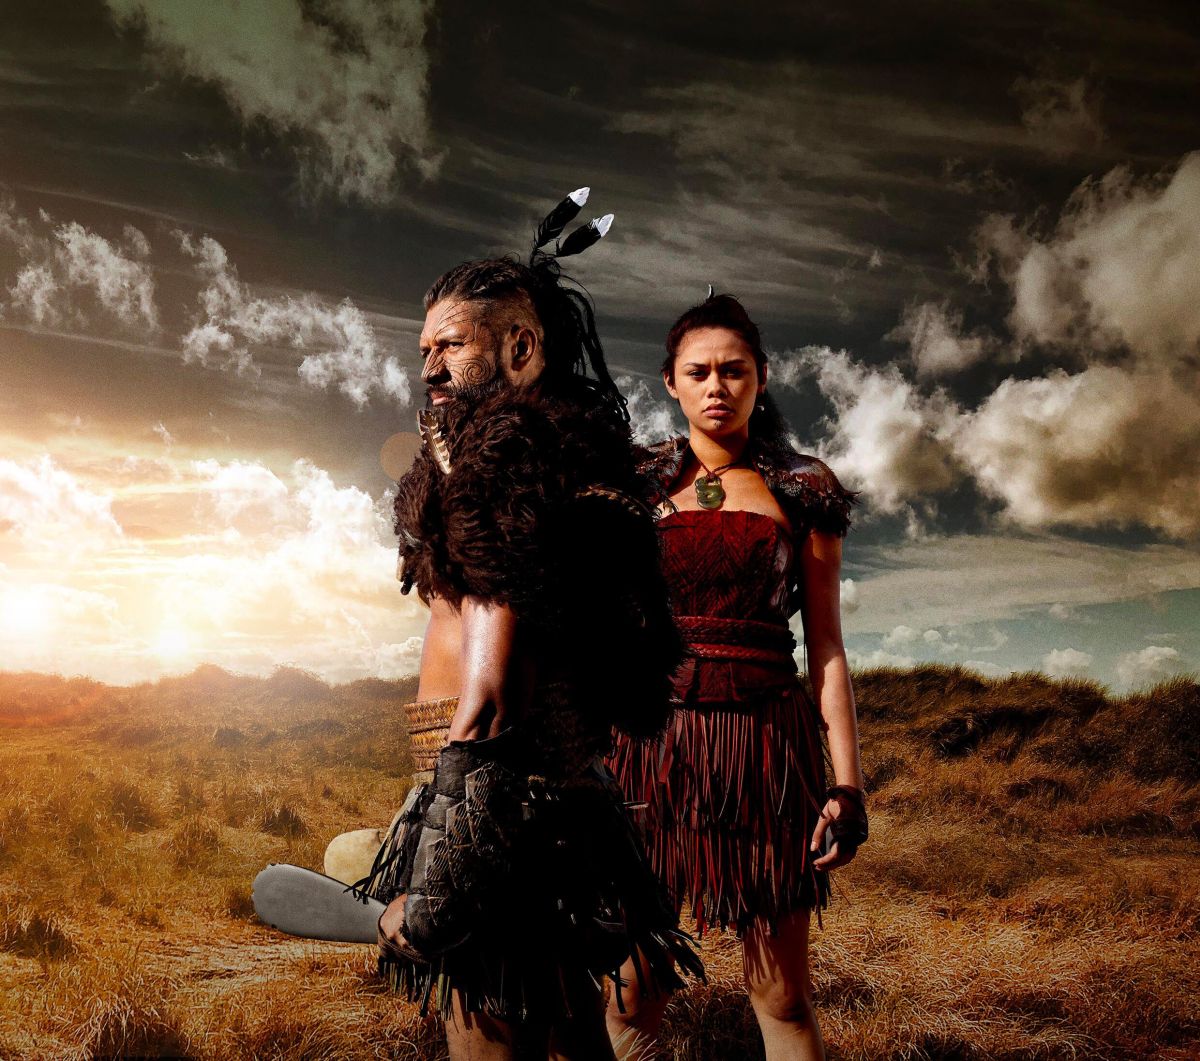 Supernatural Maori THE DEAD LANDS Comes to Shudder January 2020